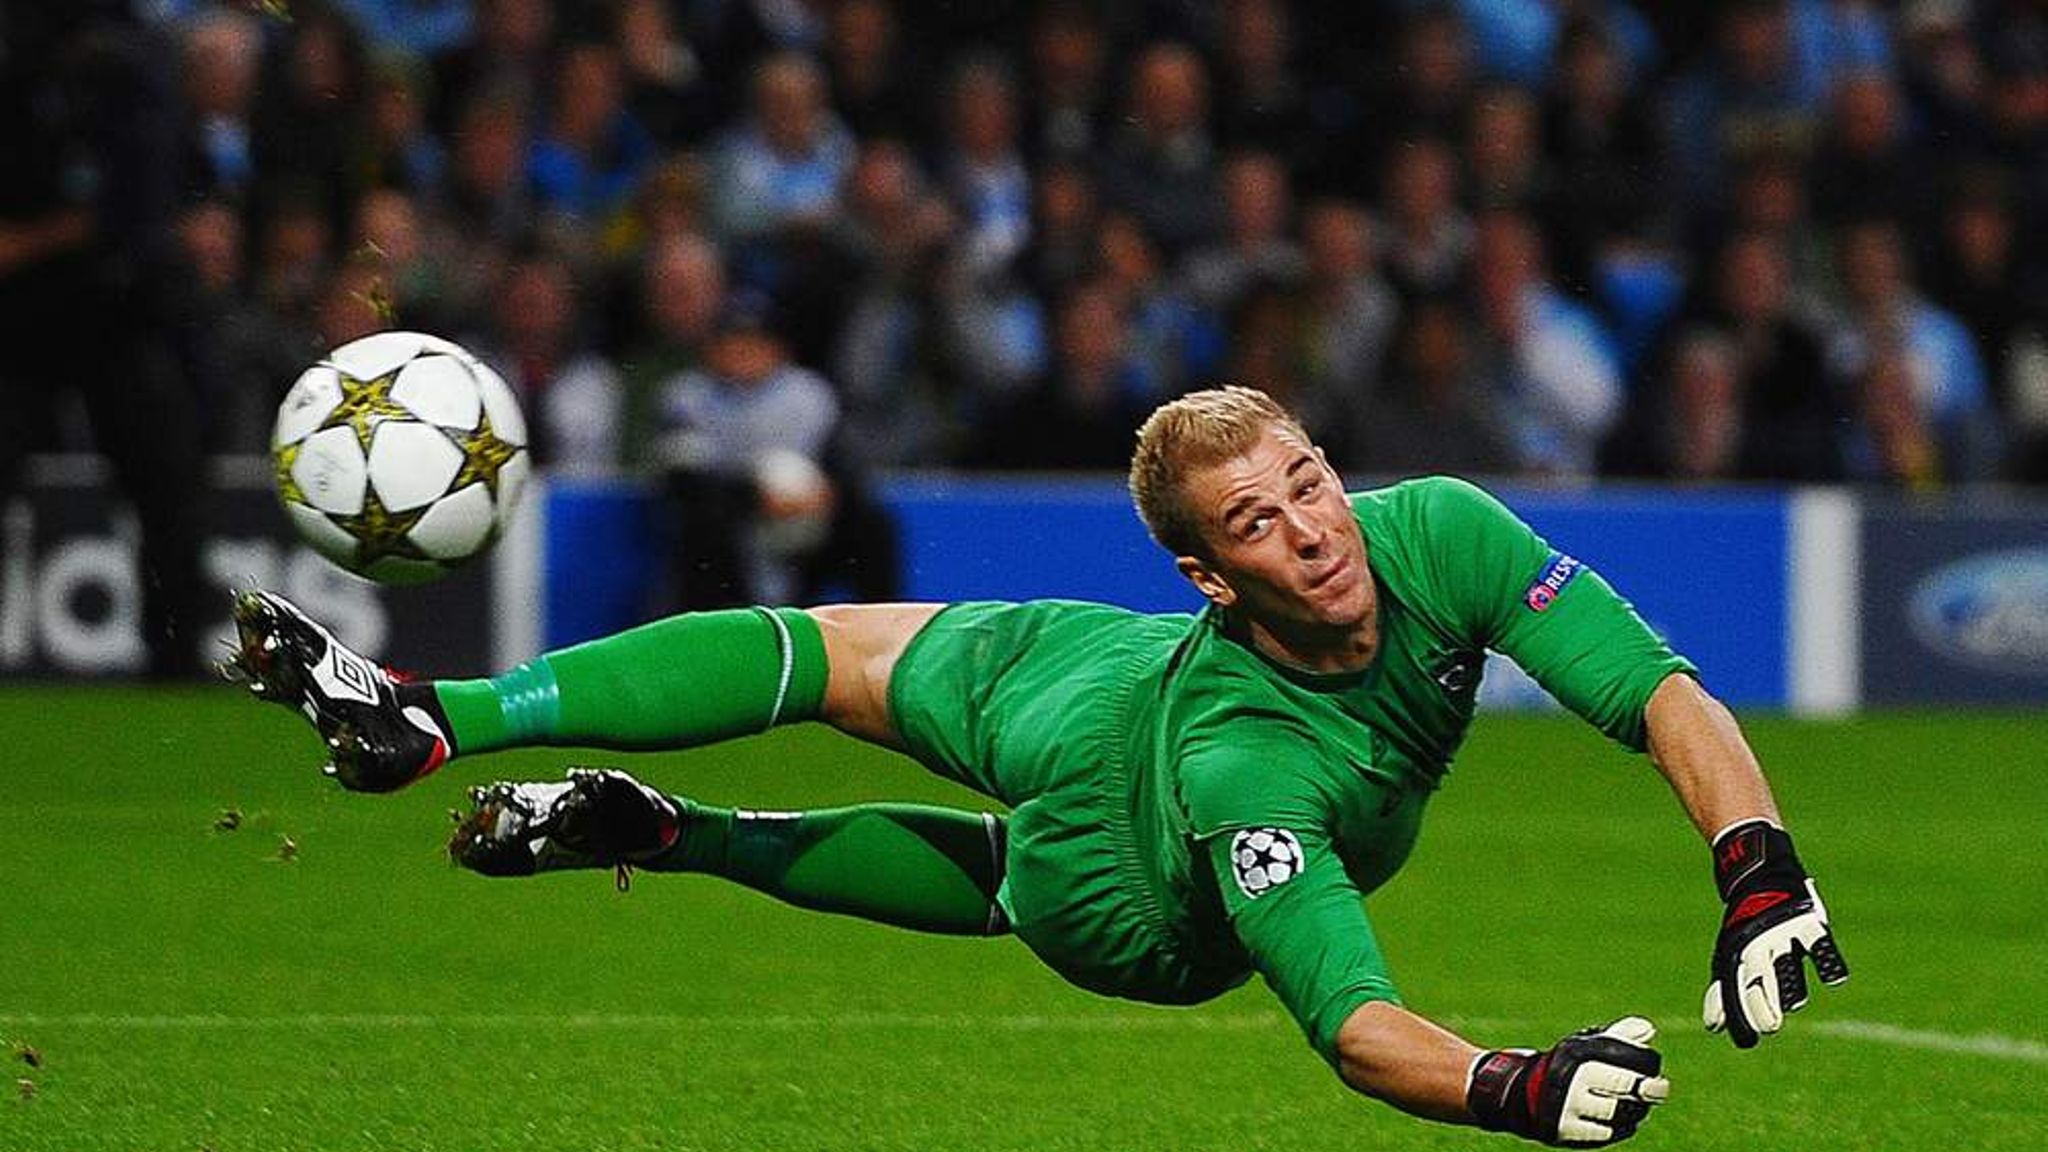 Joe Hart Makes Save For Manchester City - Best Keeper In Champions Leages - HD Wallpaper 